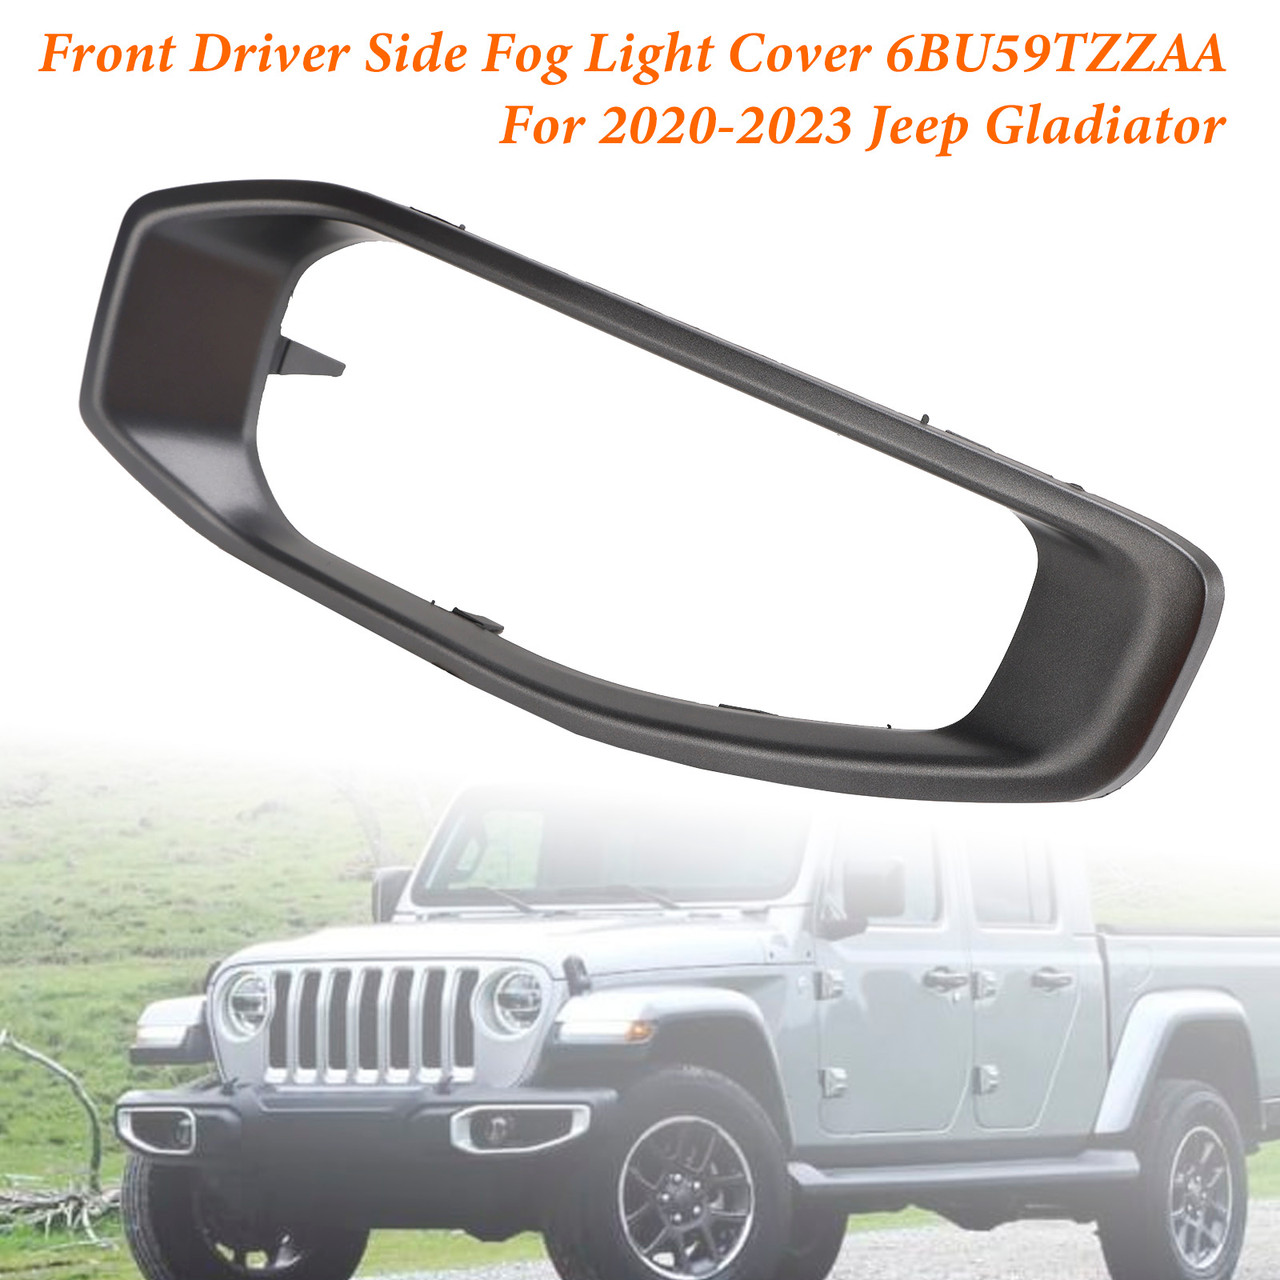 Front Driver Side Fog Light Trim 6BU59TZZAA For Jeep Gladiator 2020-2023